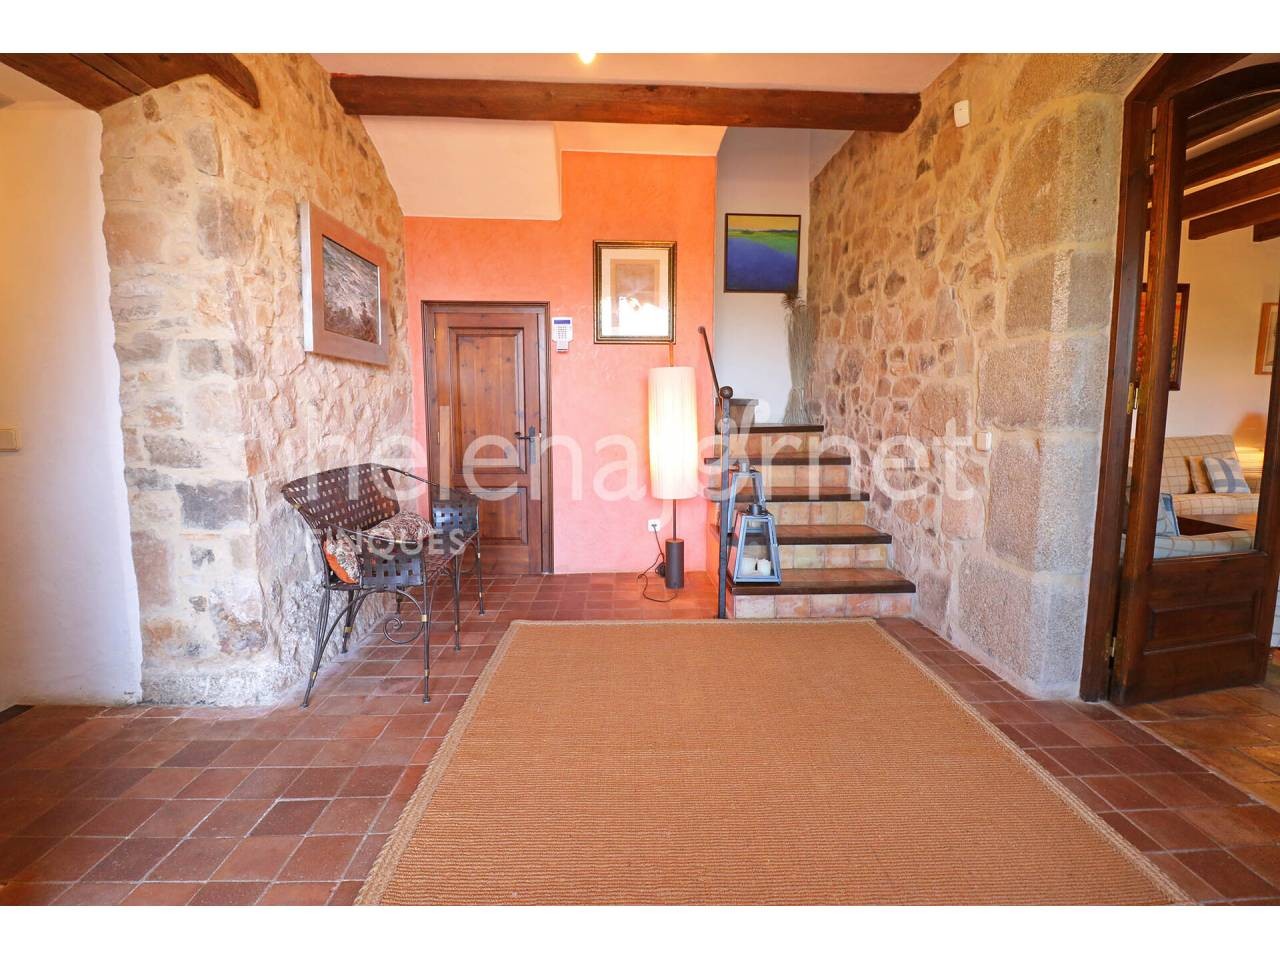 AMAZING CATALAN COUNTRY HOUSE LOCATED IN THE CHURCH NEIGHBOURHOOD IN SANTA CRISTINA D’ARO - 3547